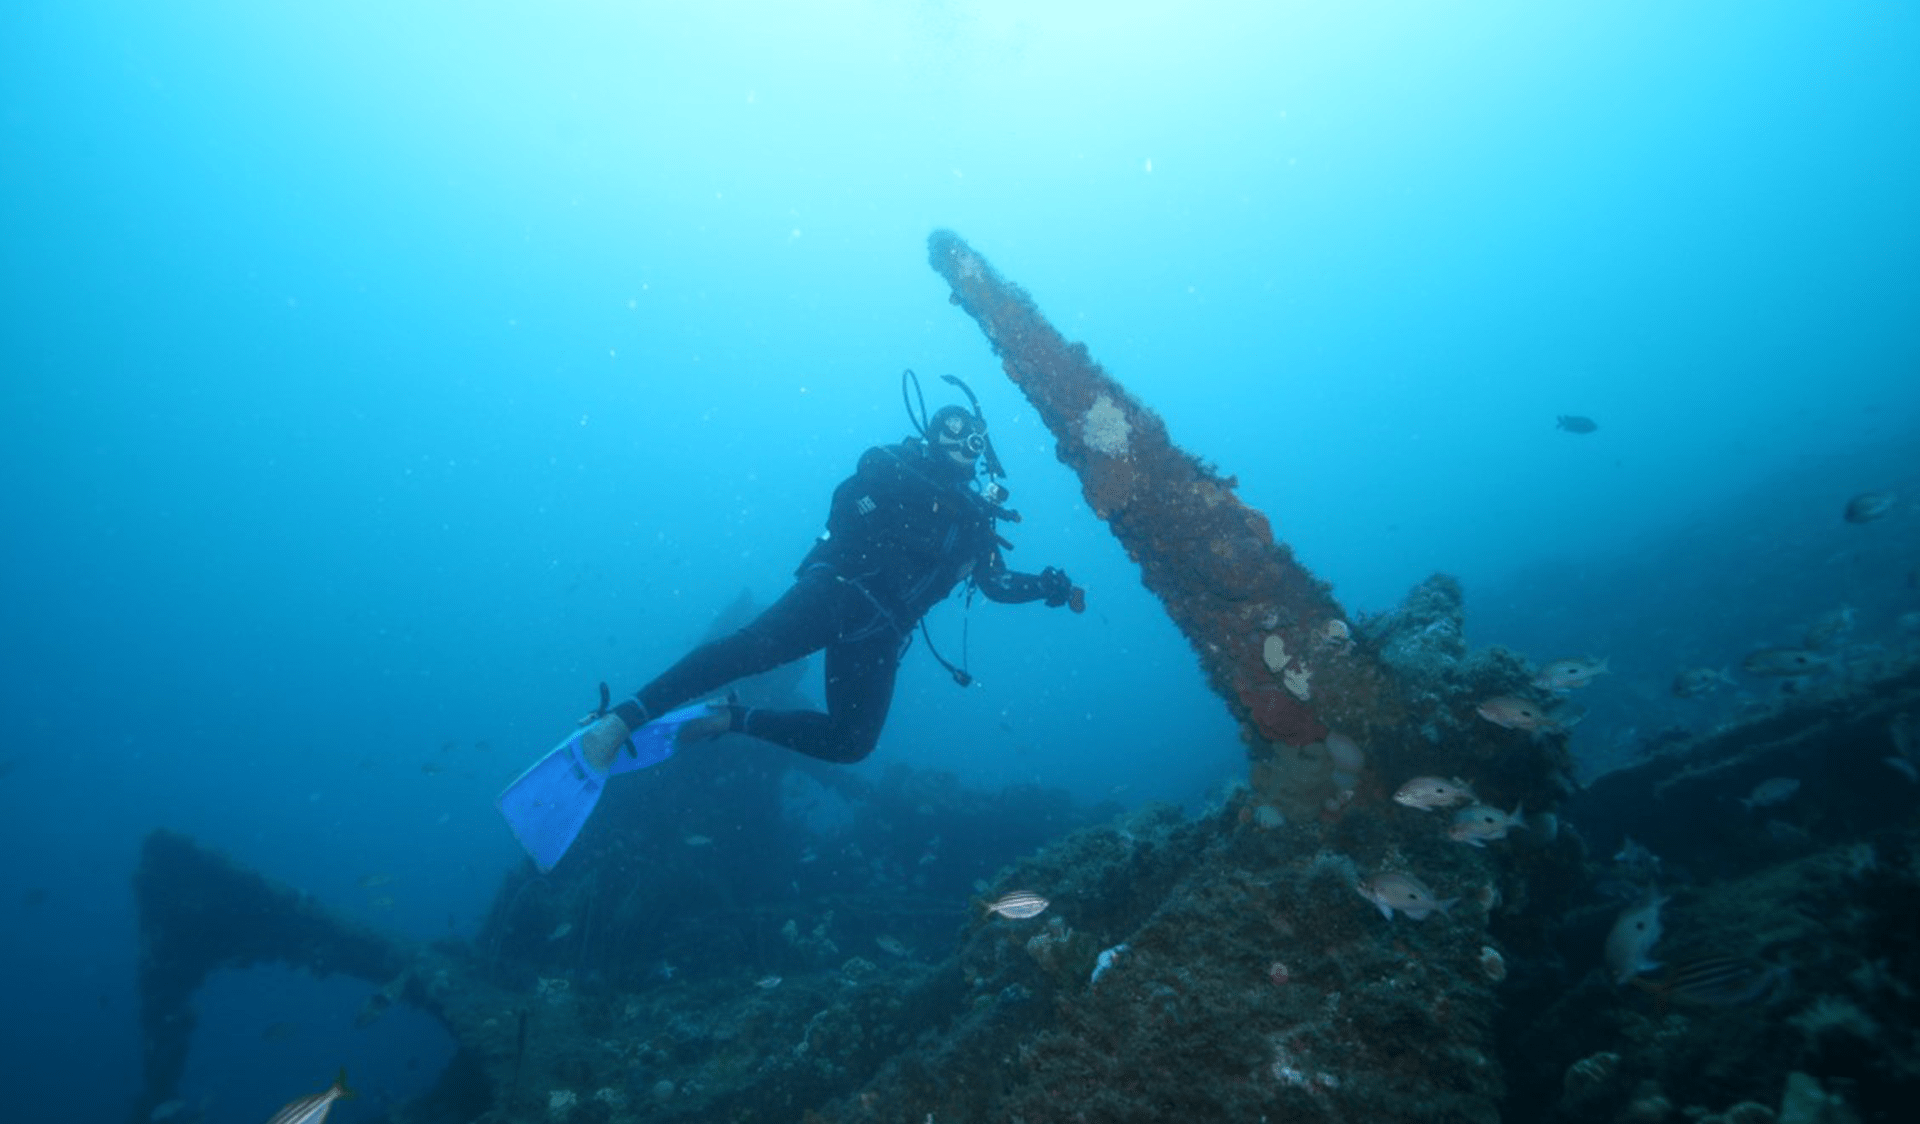 A diver investigates the large four bladed propeller from the S.S. Auckland shipwreck in Beware Reef Marine Sanctuary